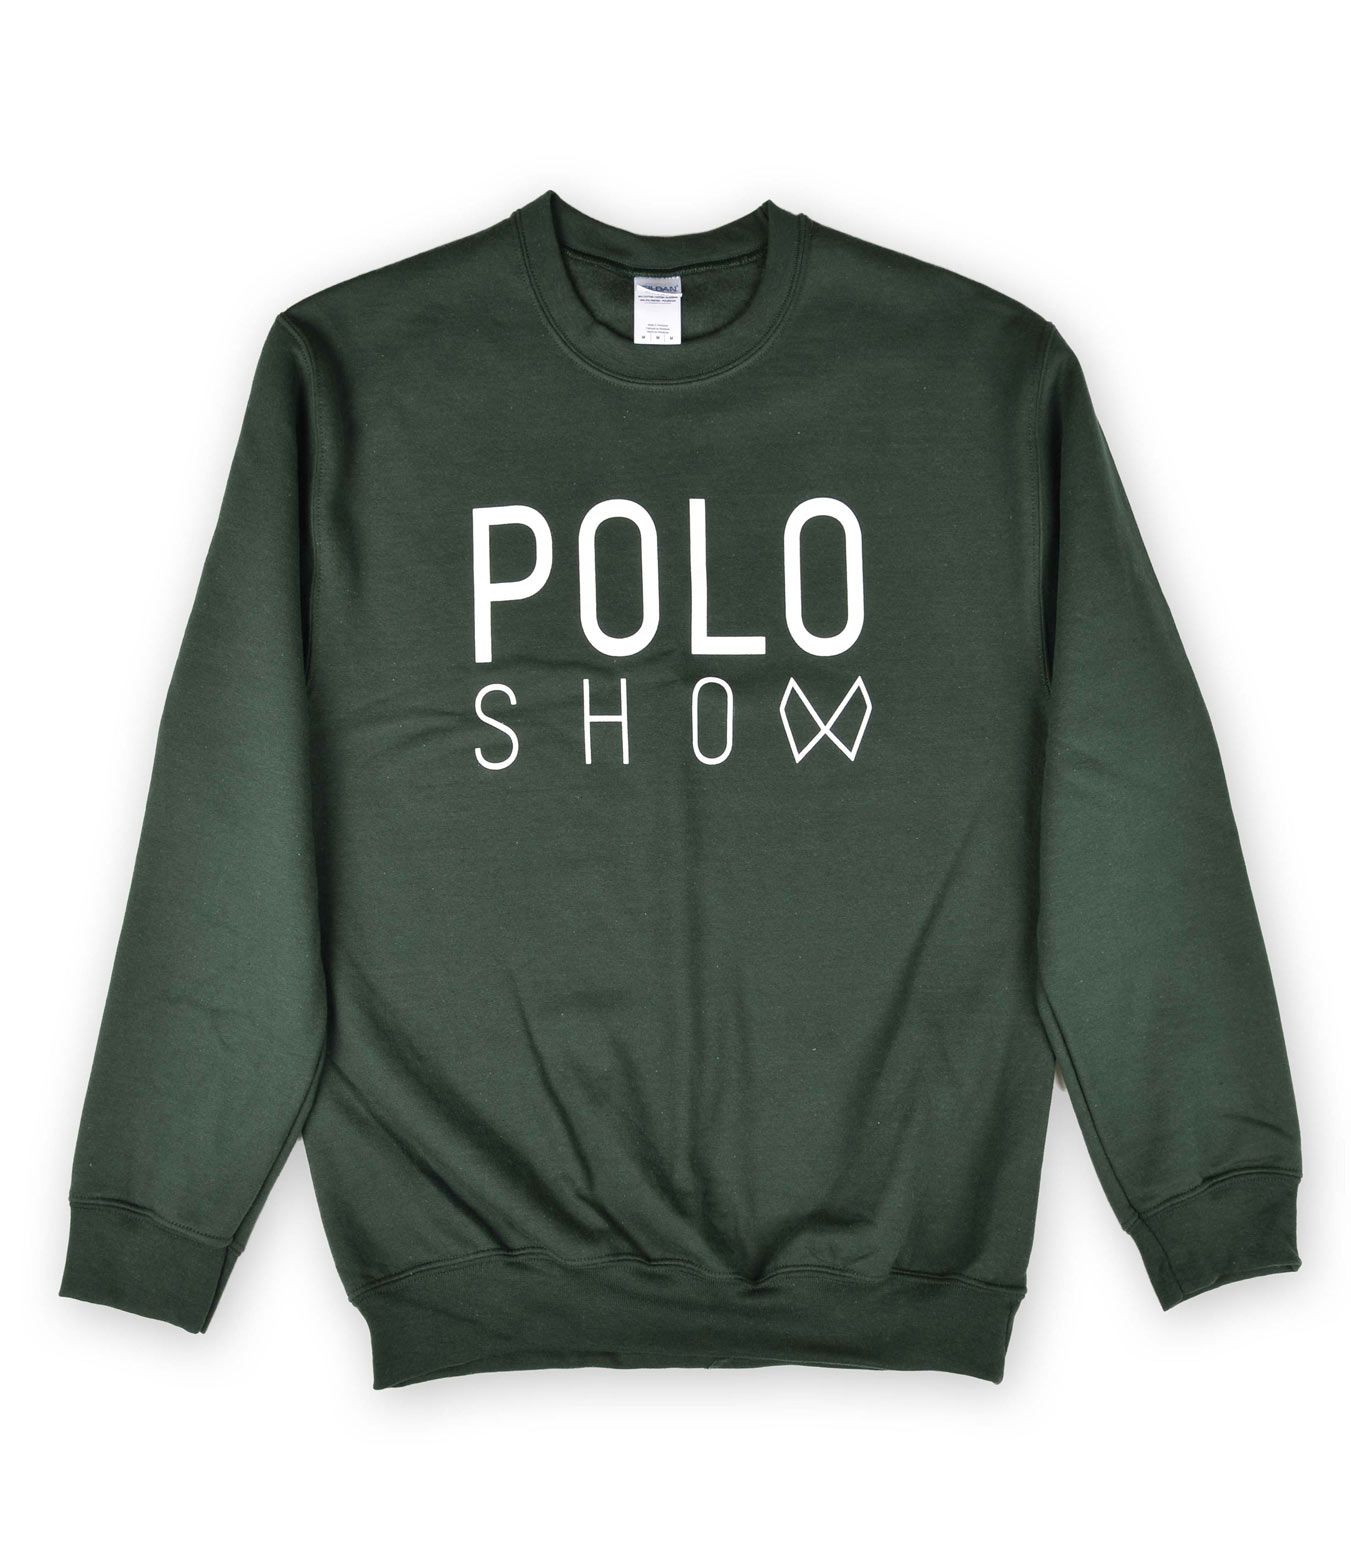 Poloshow sweater green 1